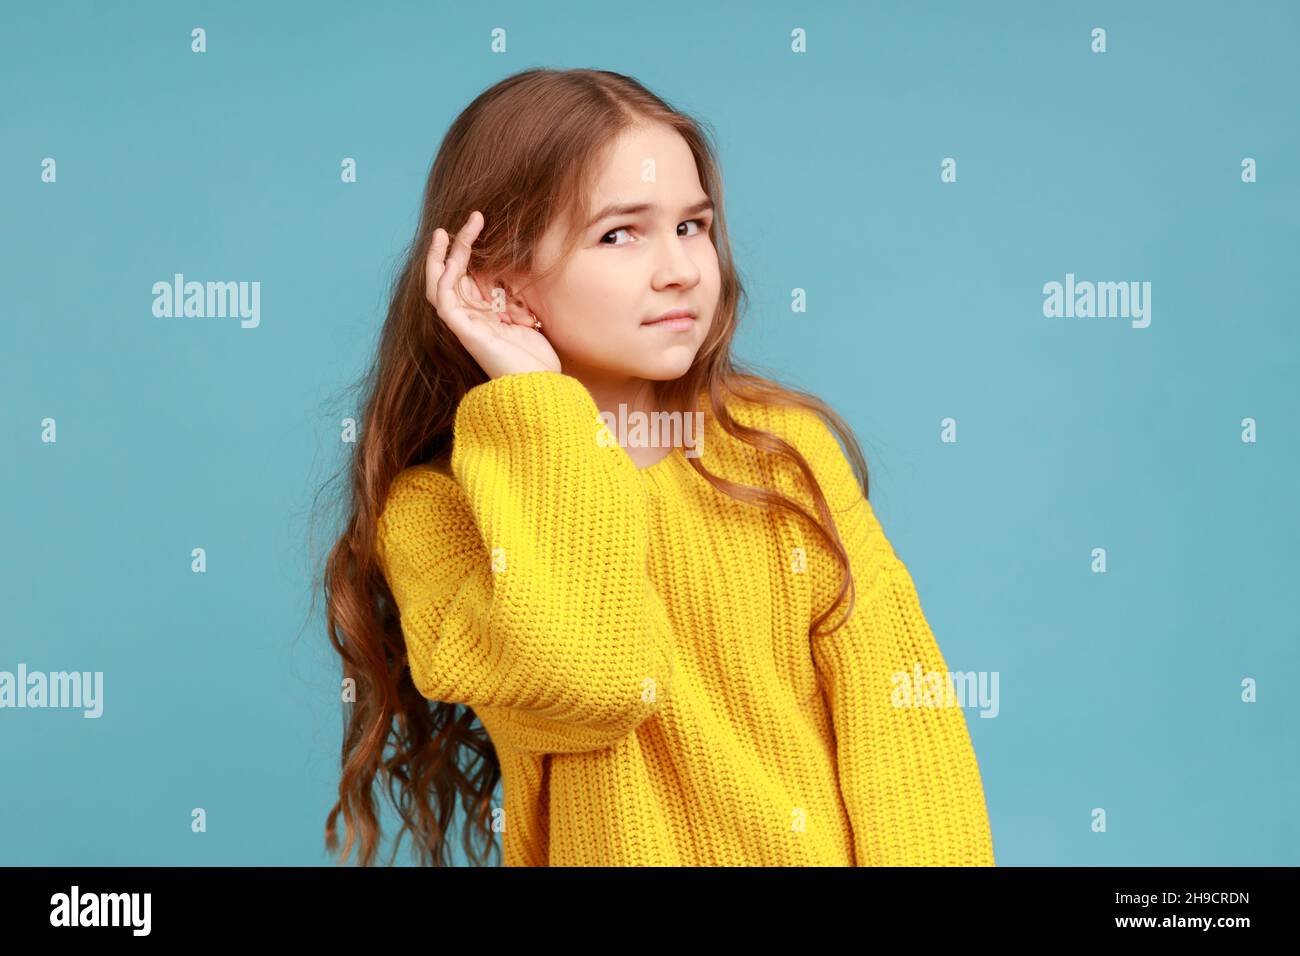 Portrait of little girl holding hand near ear and listening carefully intently to what you say, wearing yellow casual style sweater. Indoor studio shot isolated on blue background. Stock Photo